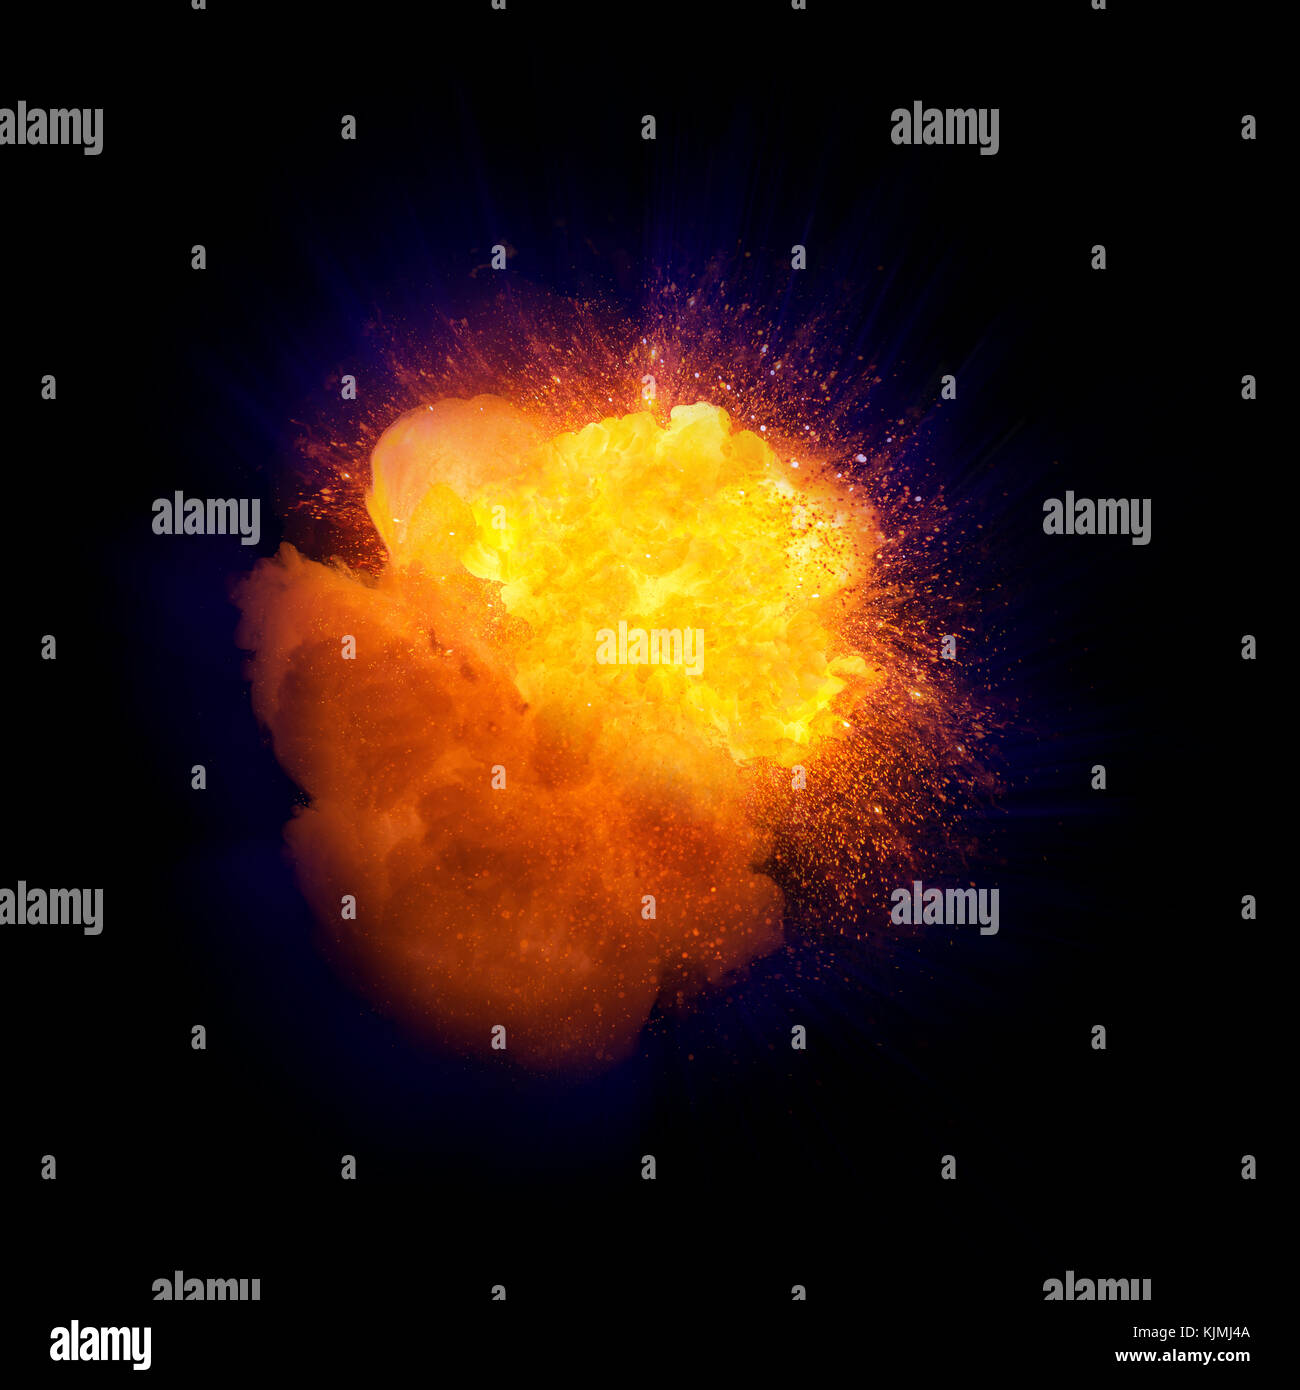 Realistic fire explosion, orange color with blue cast and sparks isolated on black background Stock Photo